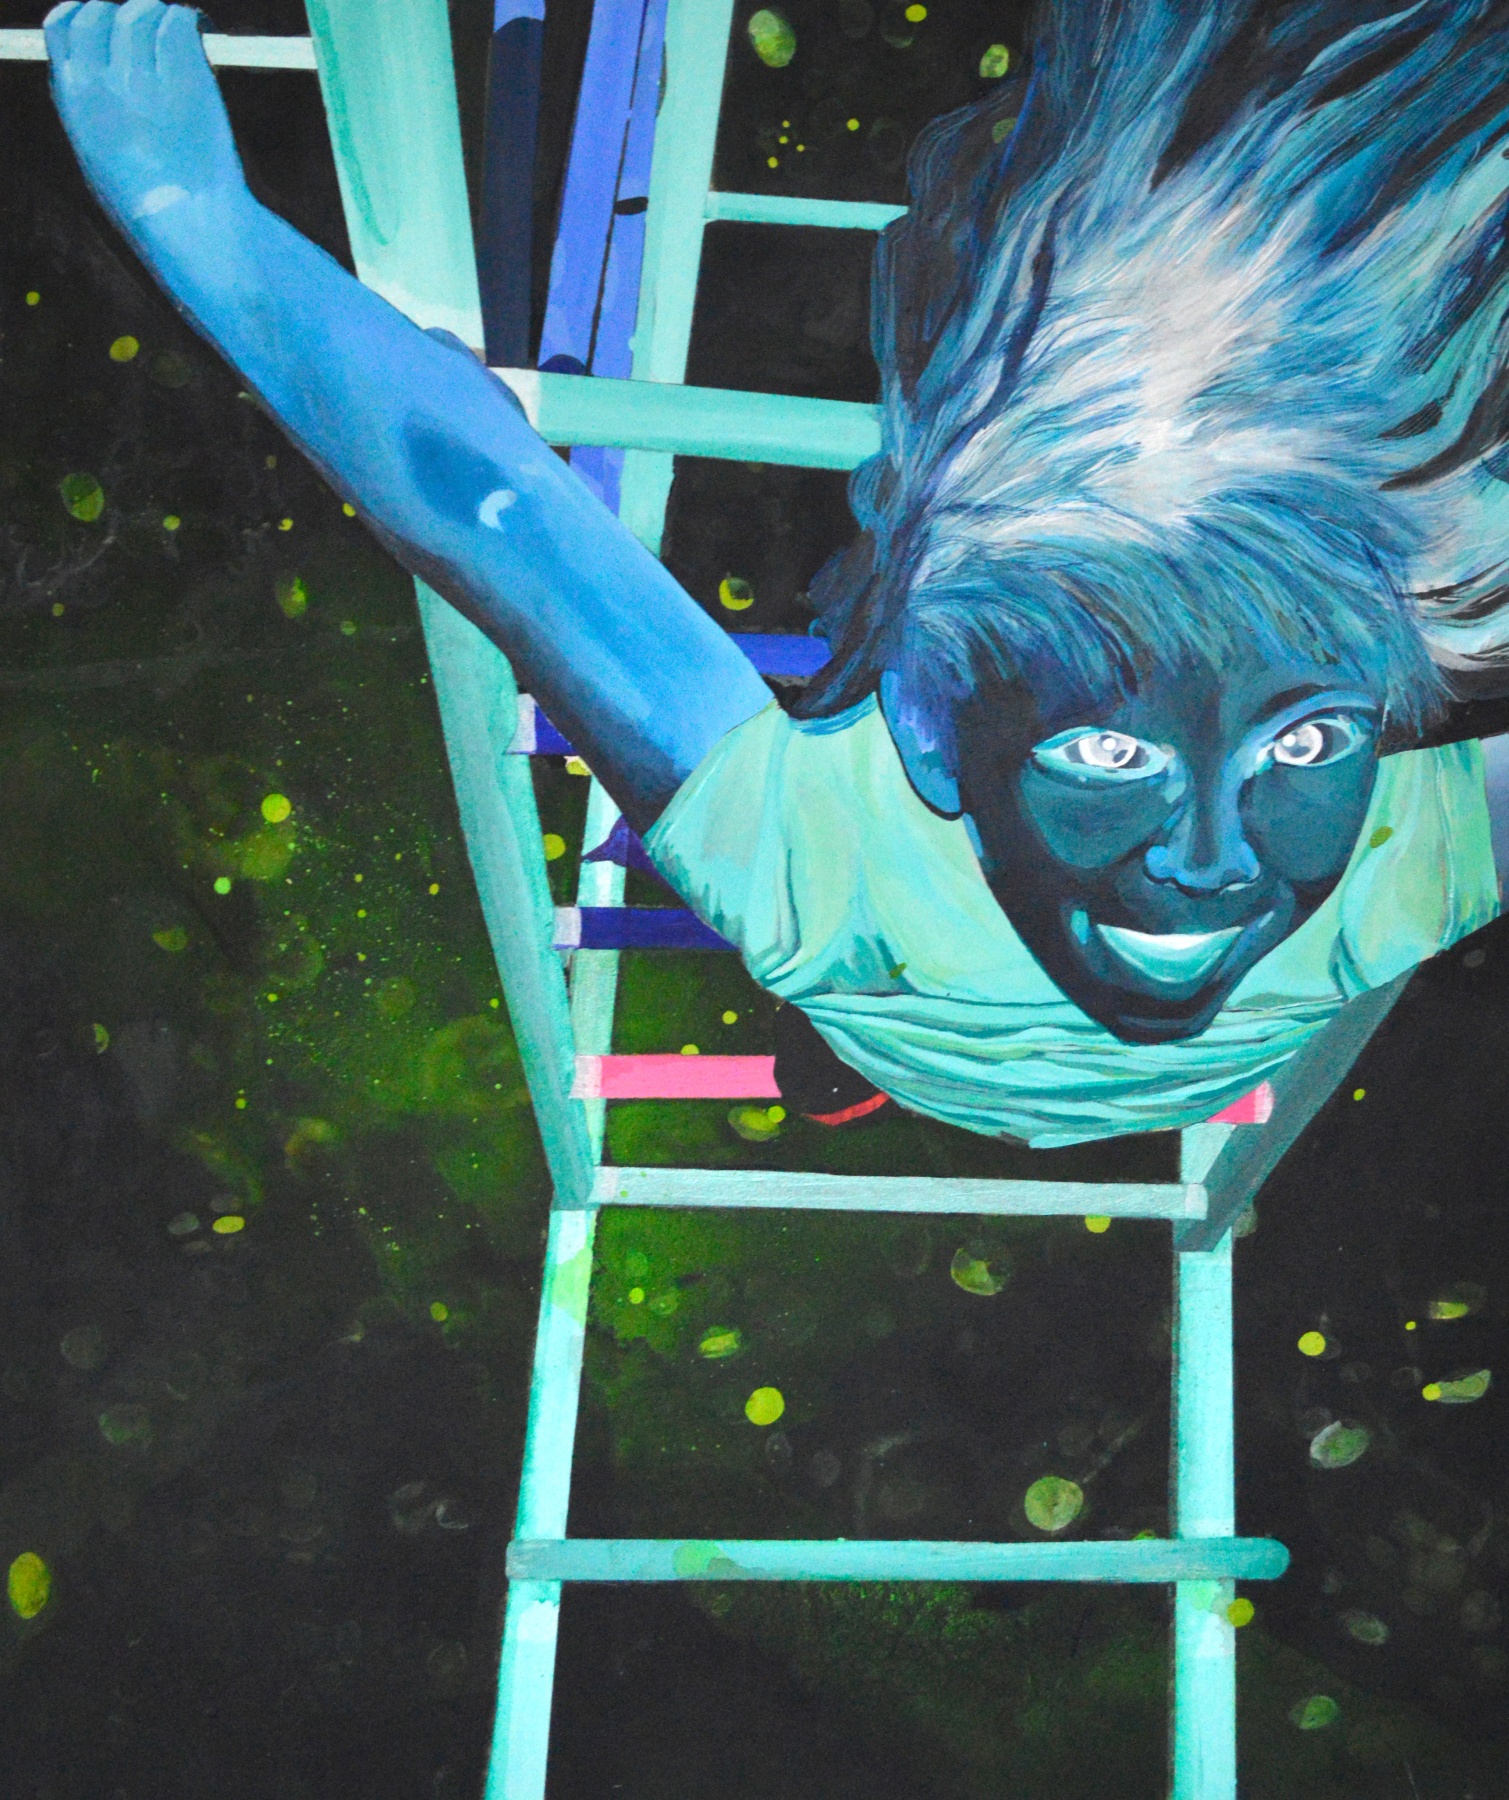 Painting of a kid hanging off a jungle gym in inverted green and blue colors